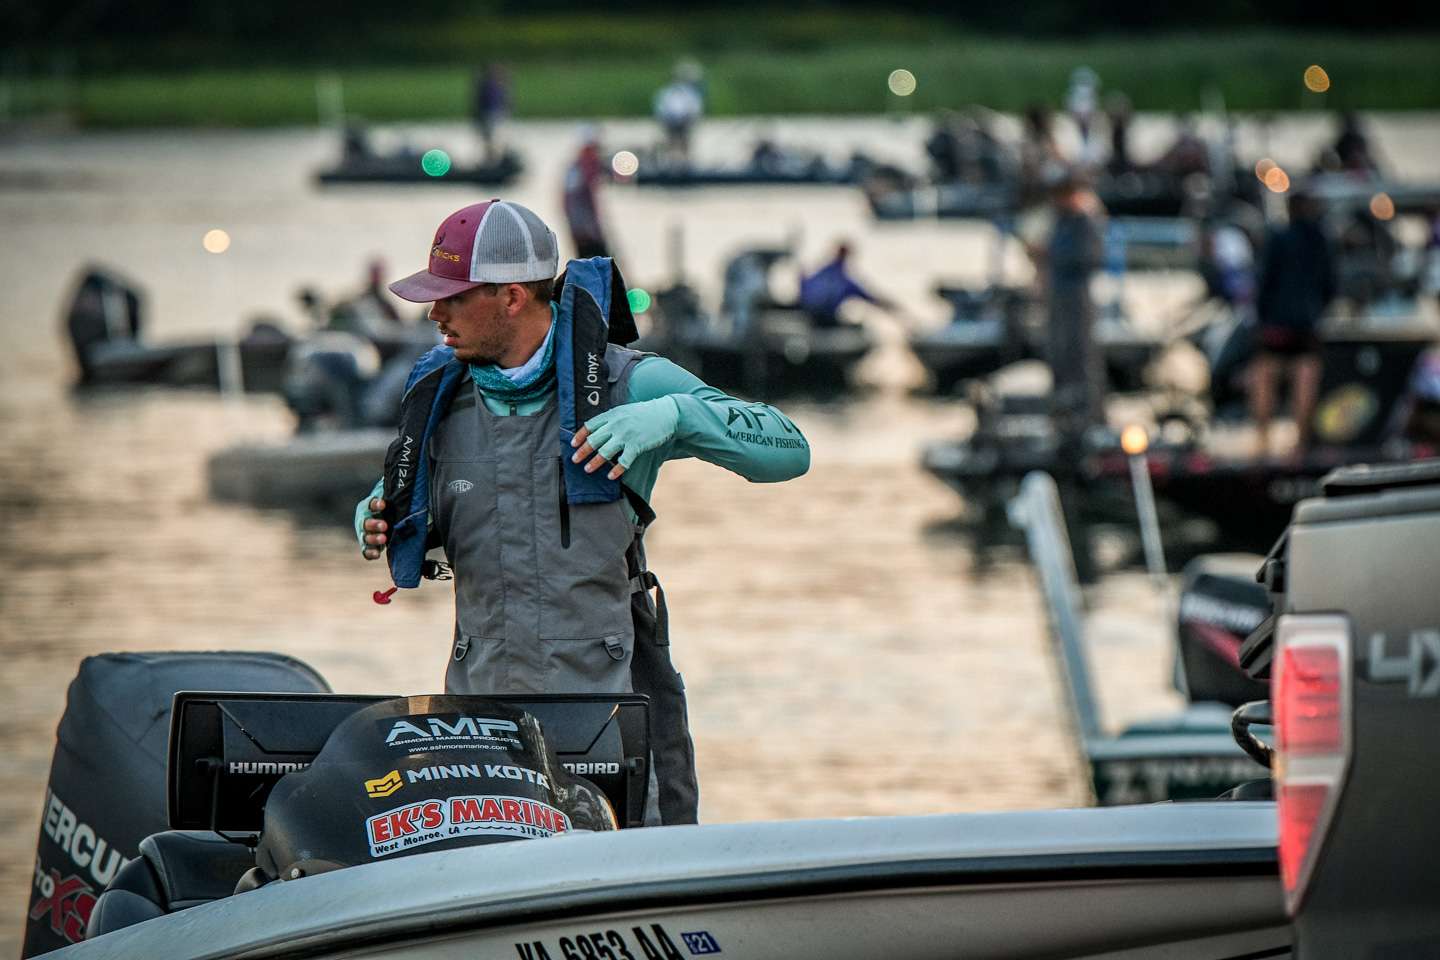 See the competitors head out and fish their second day at the Carhartt Bassmaster College Series National Championship presented by Bass Pro Shops.